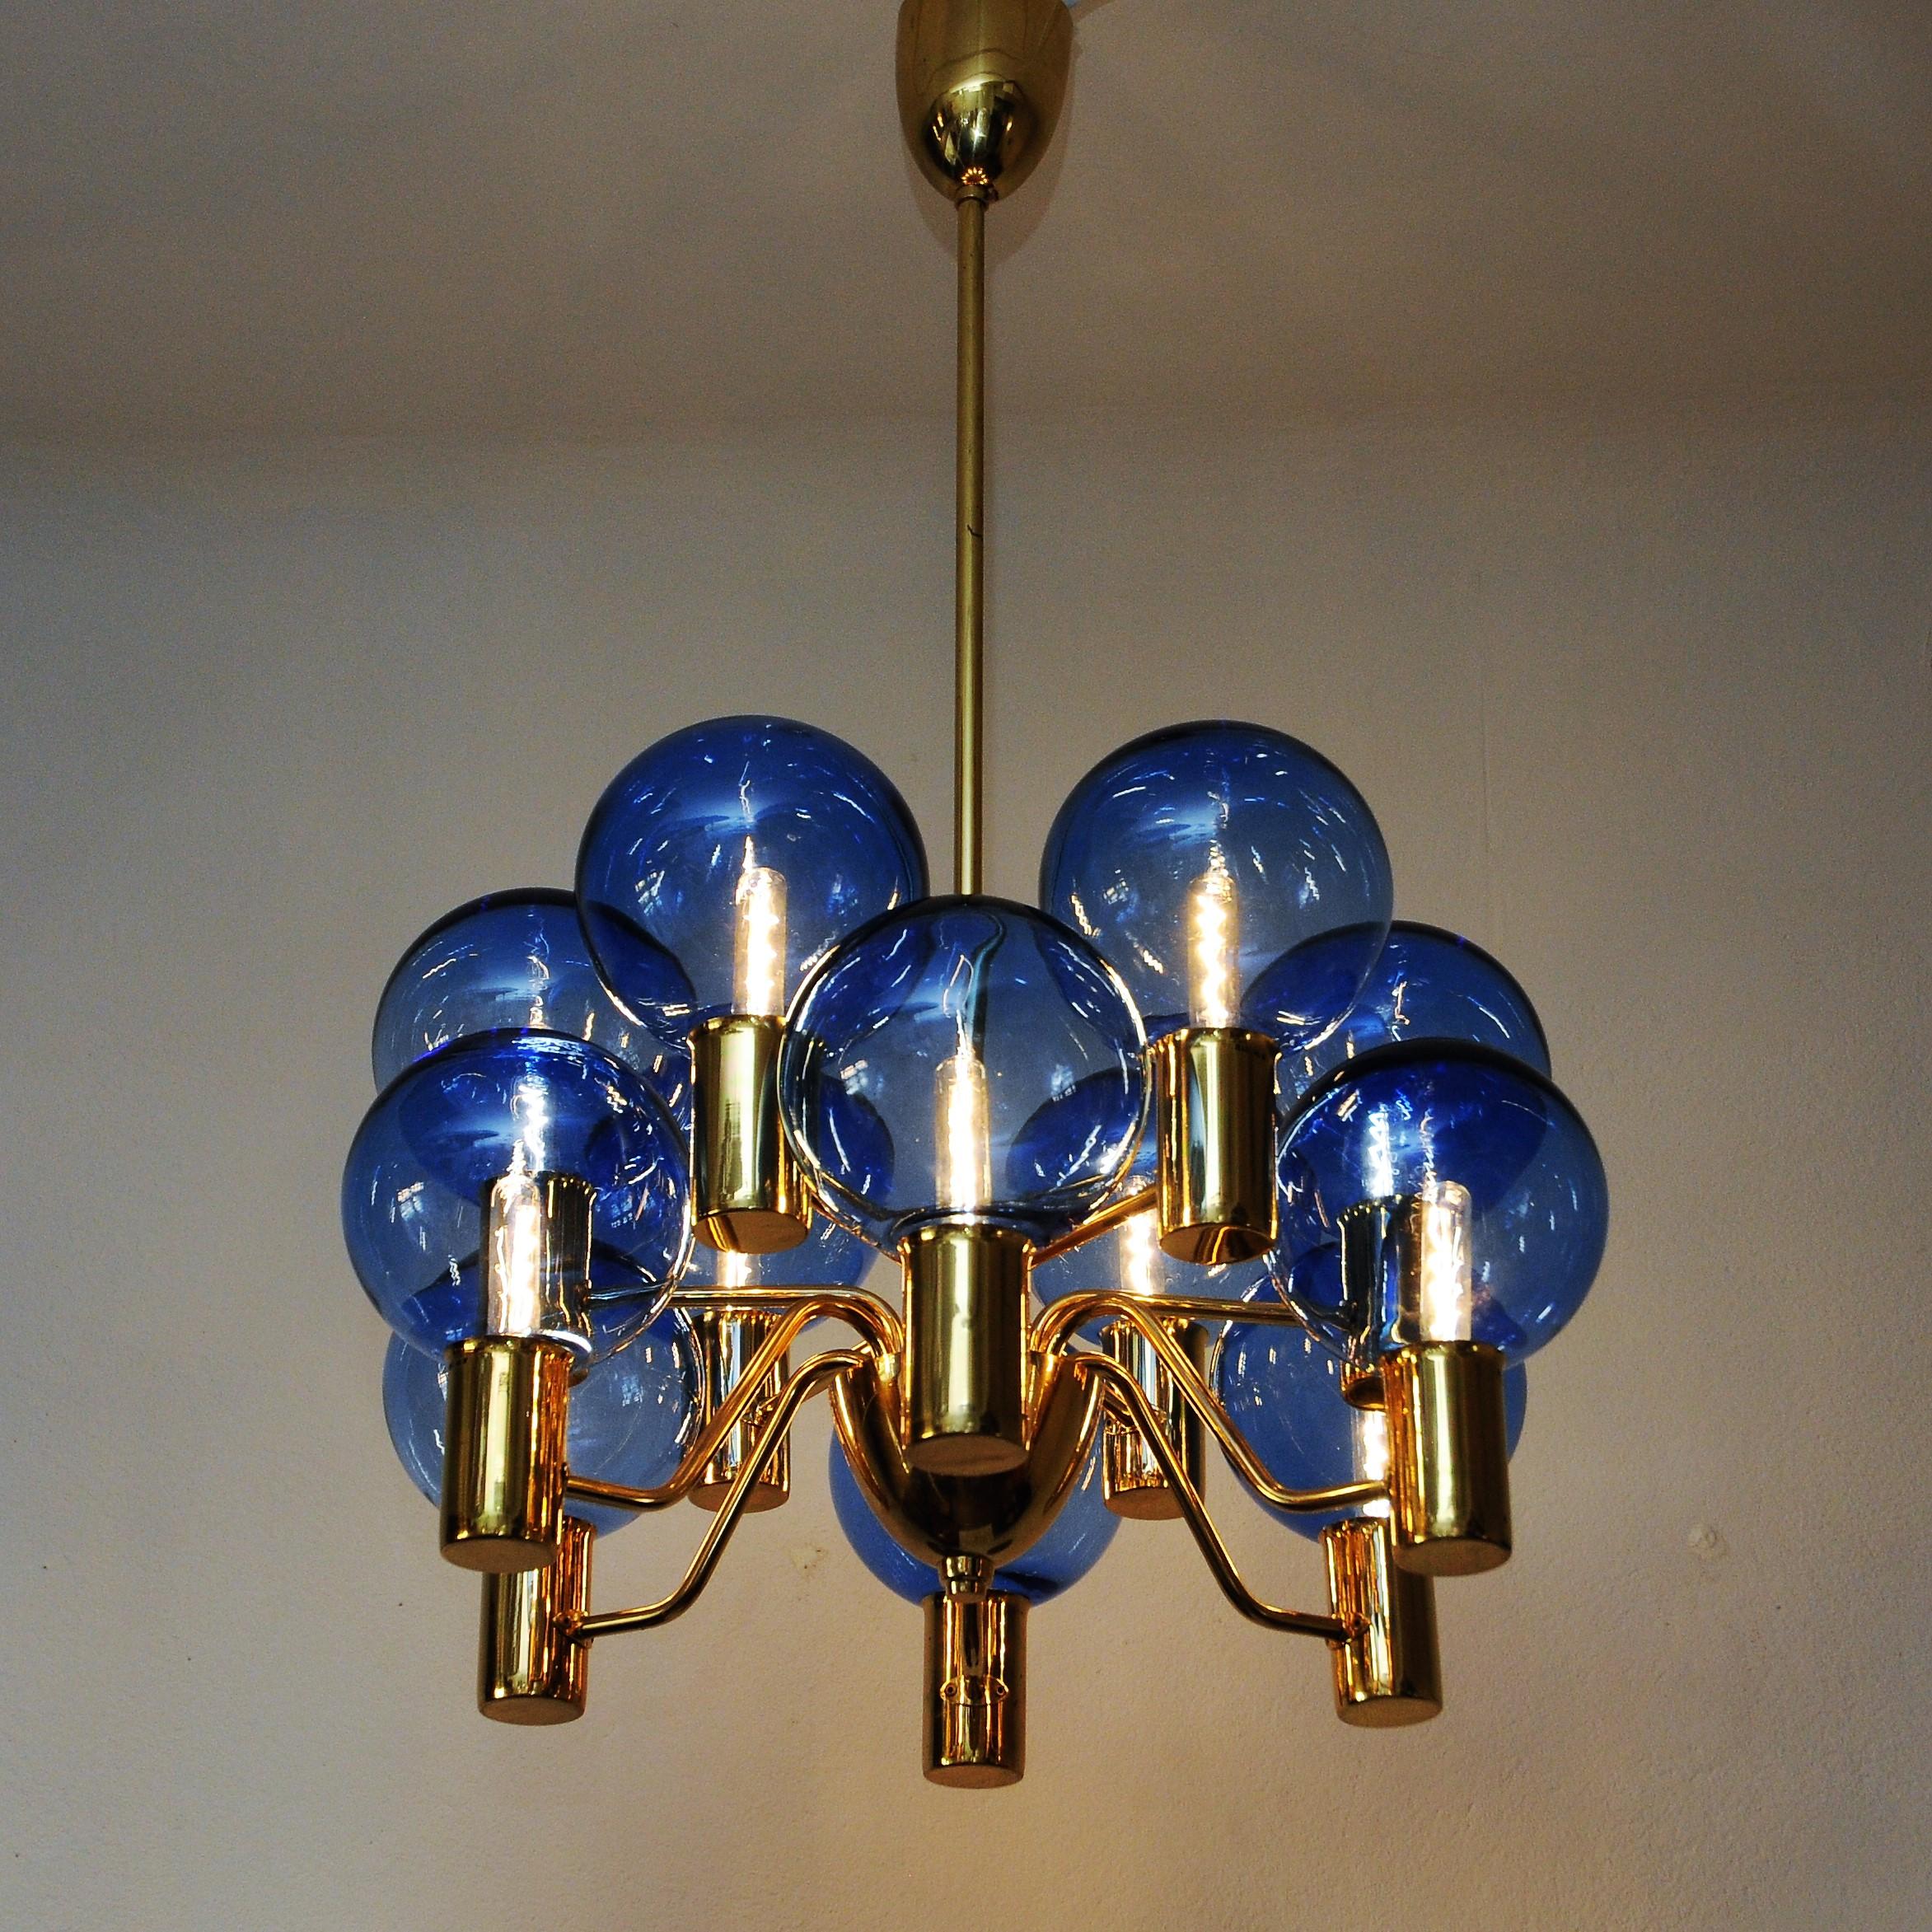 A beautiful and amazing Patricia chandelier with fantastic bluecolored stunning domes that really impresses you! This is model T372/12 by Hans-Agne Jakobsson. A 12-armed chandelier made in polished brass. Produced by Hans-Agne Jakobsson AB in